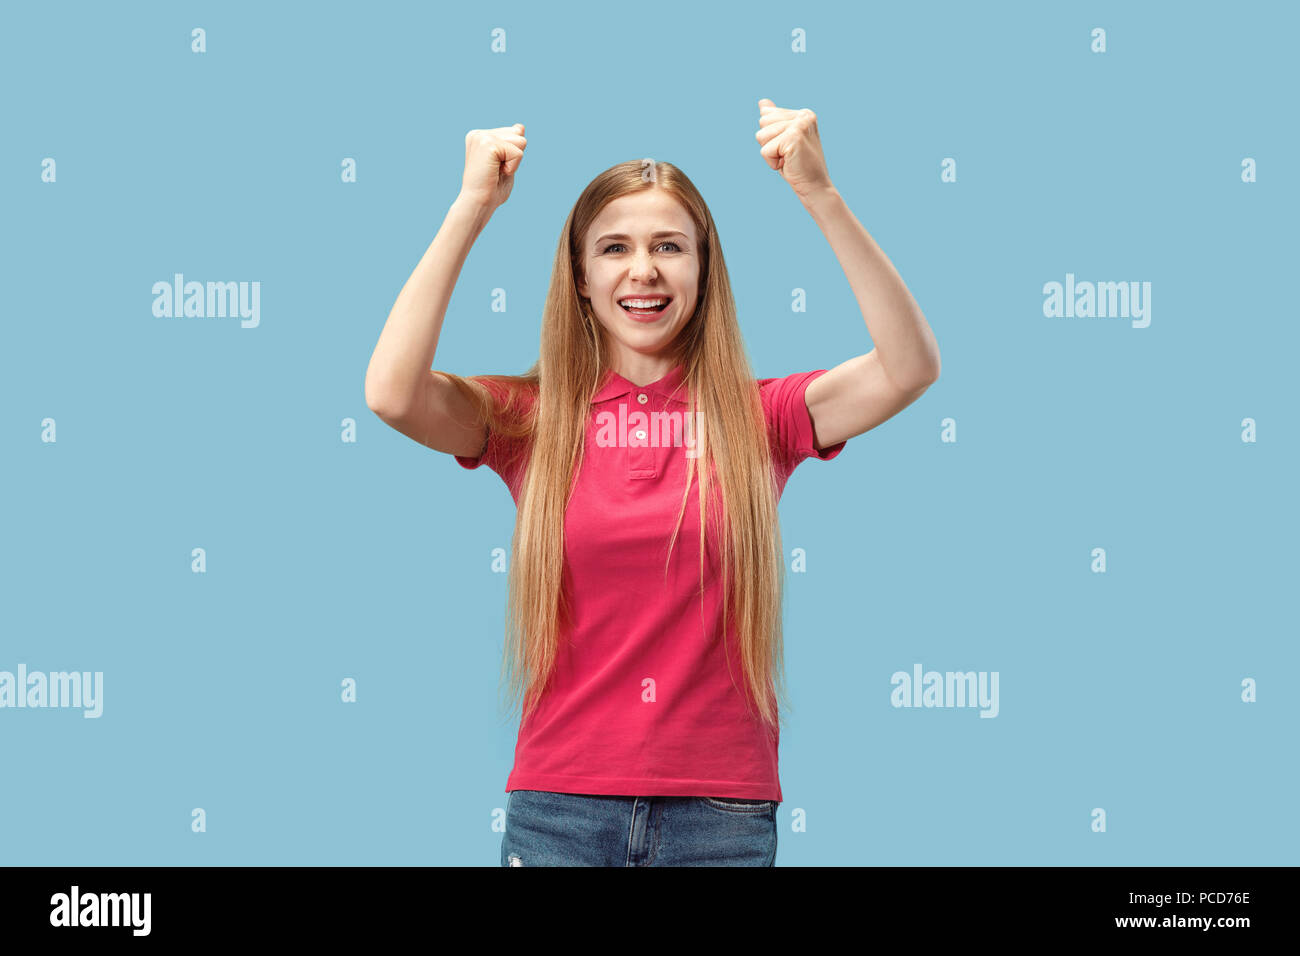 Winning success woman happy ecstatic celebrating being a winner. Dynamic energetic image of female model Stock Photo